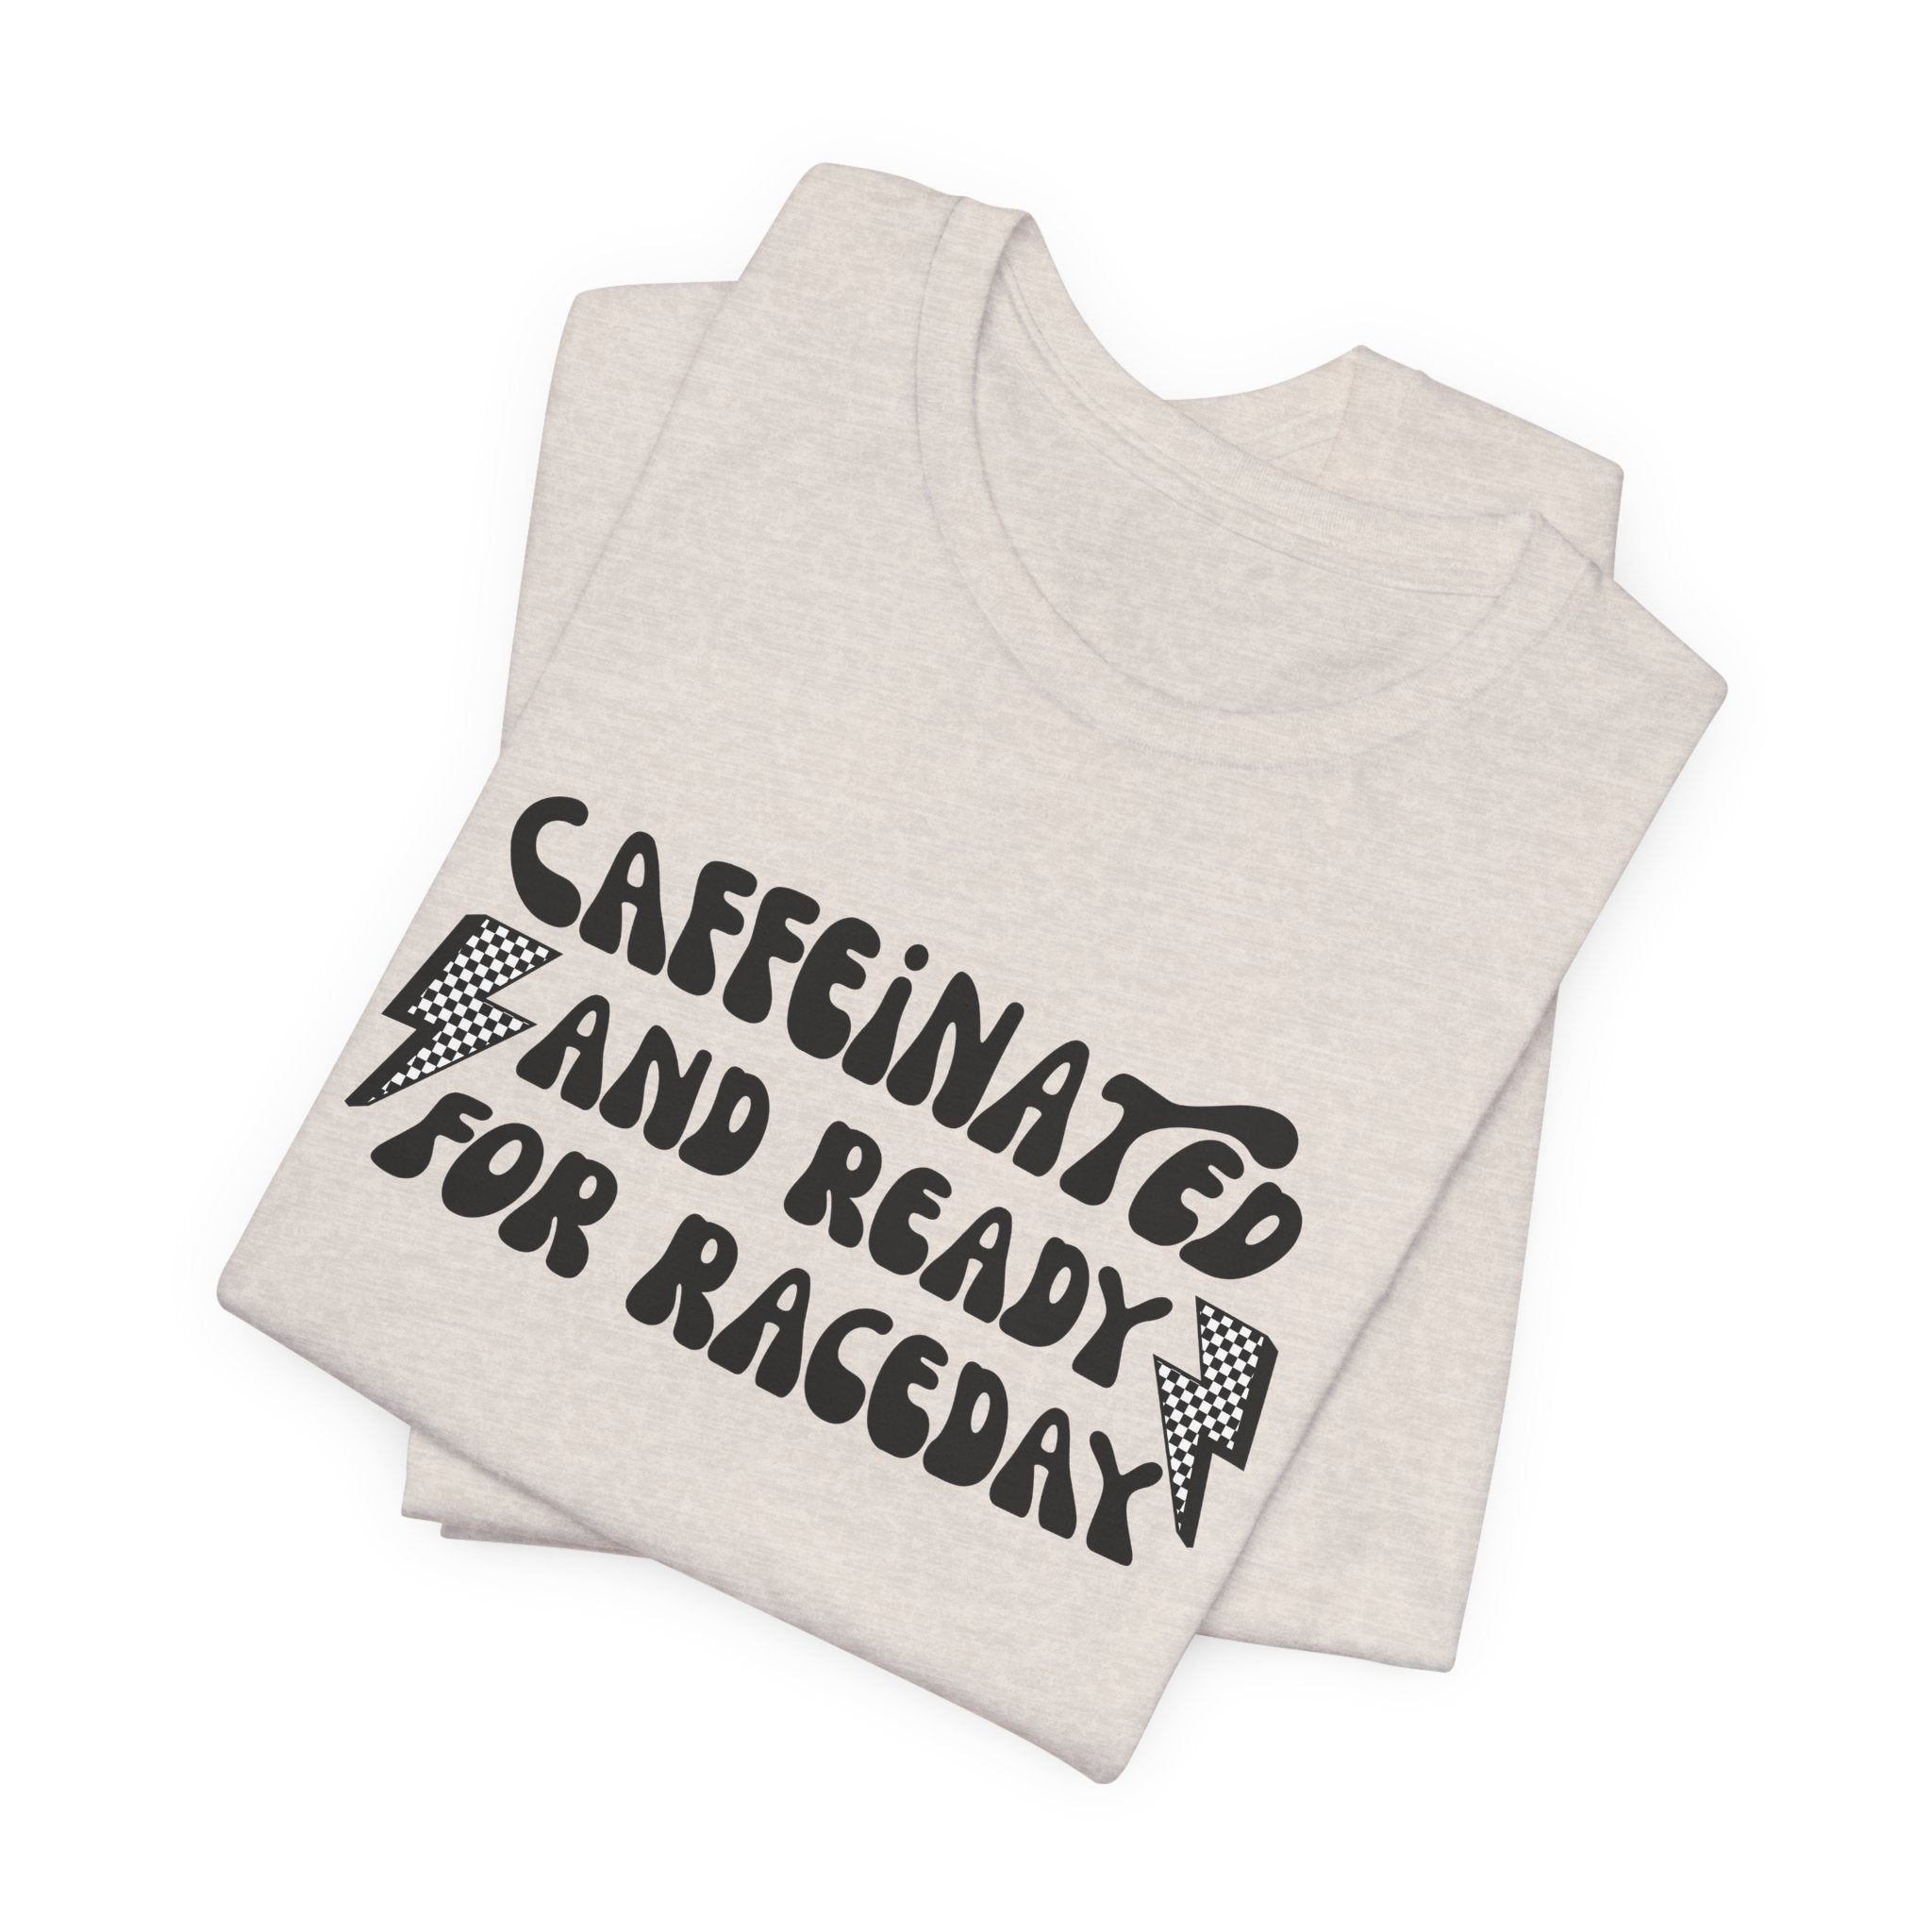 Caffeinated and Ready for Raceday Graphic T-Shirt for Women